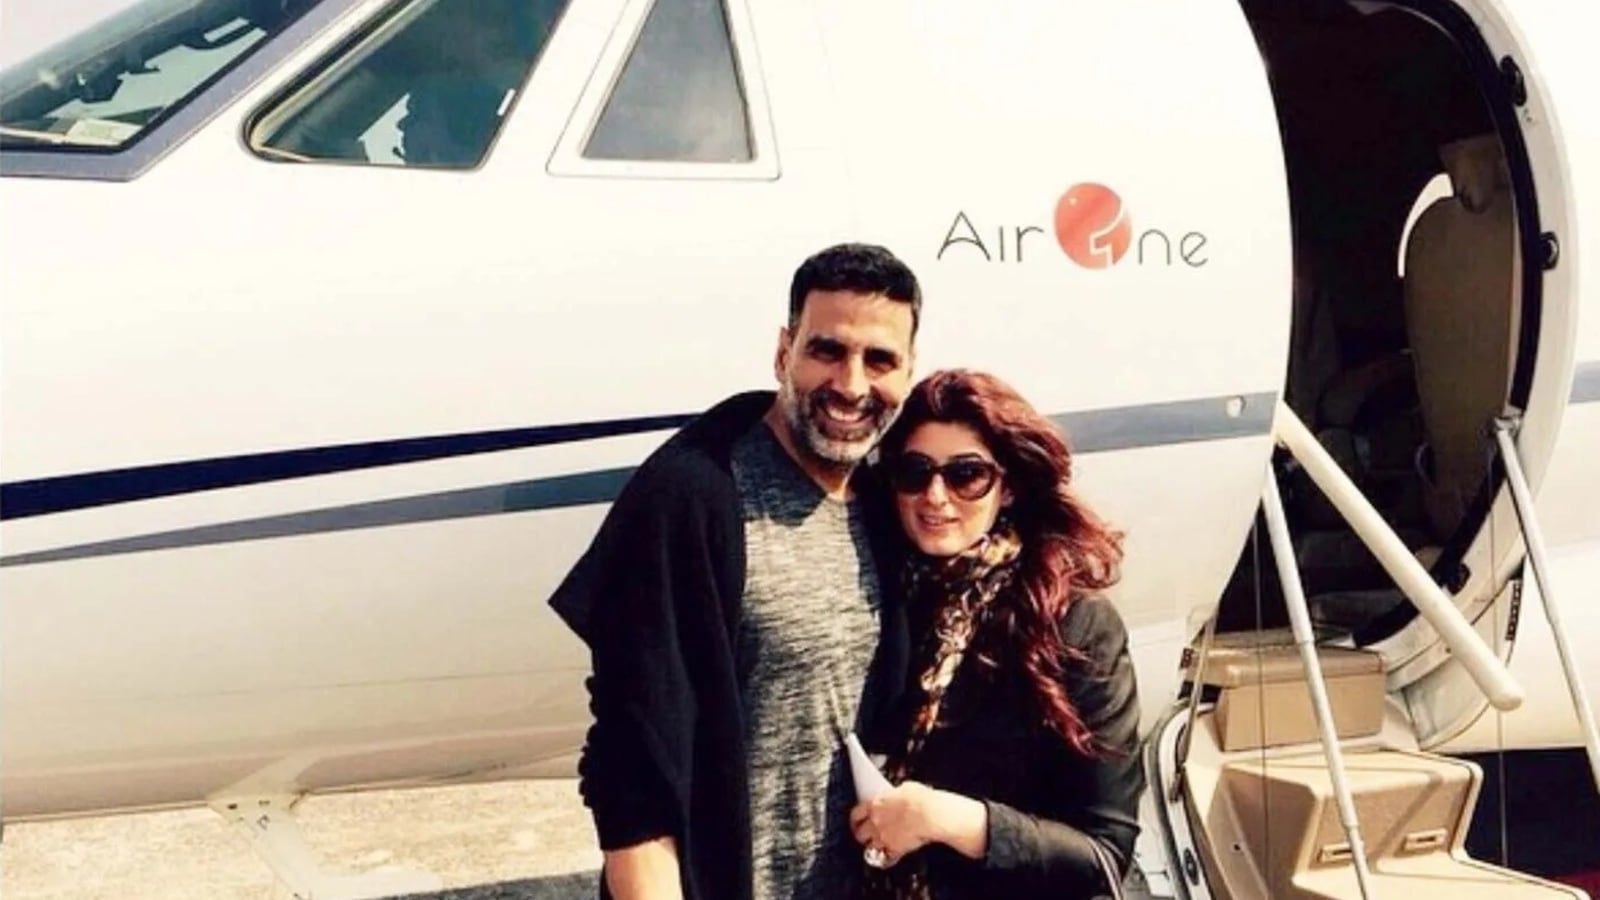 akshay-kumar-denies-owning-private-jet-worth-inr260-cr-calls-out-baseless-lies